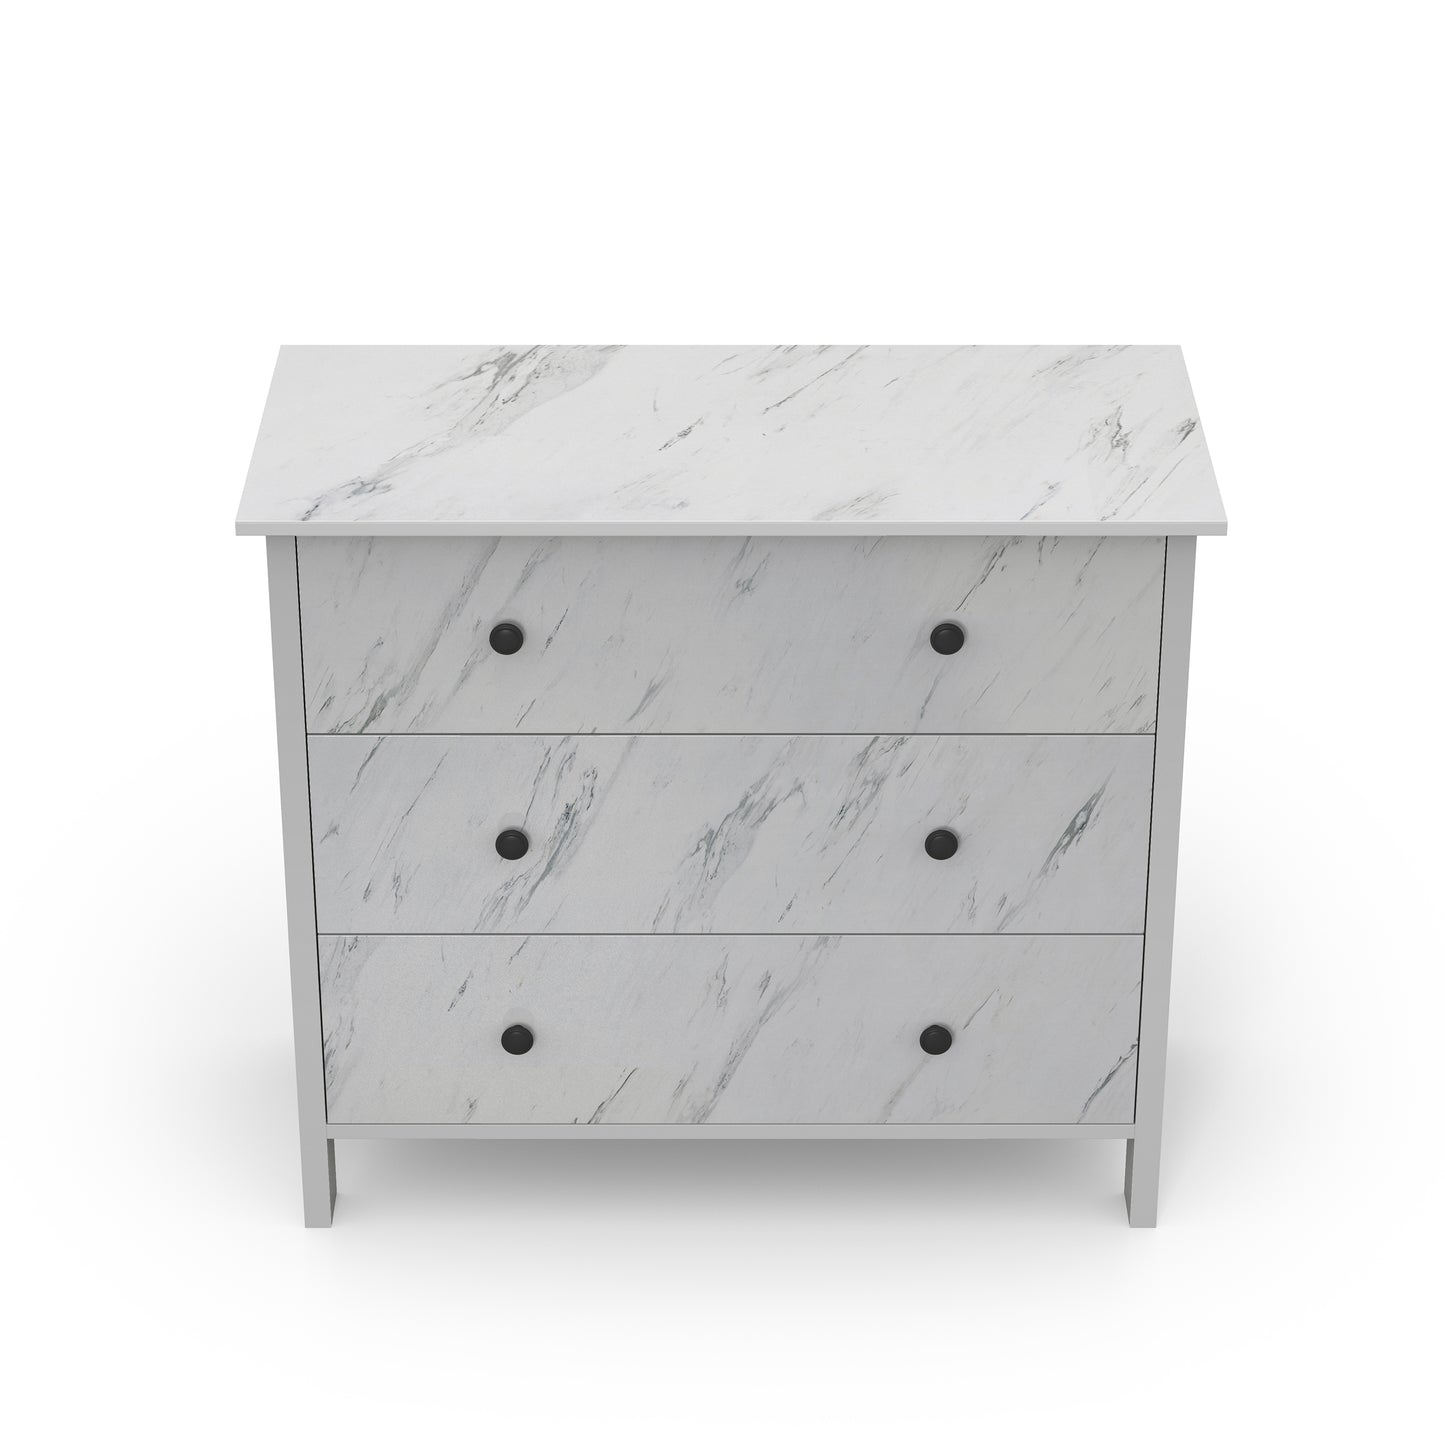 Front-facing upper view of a transitional white faux marble three-drawer youth dresser on a white background